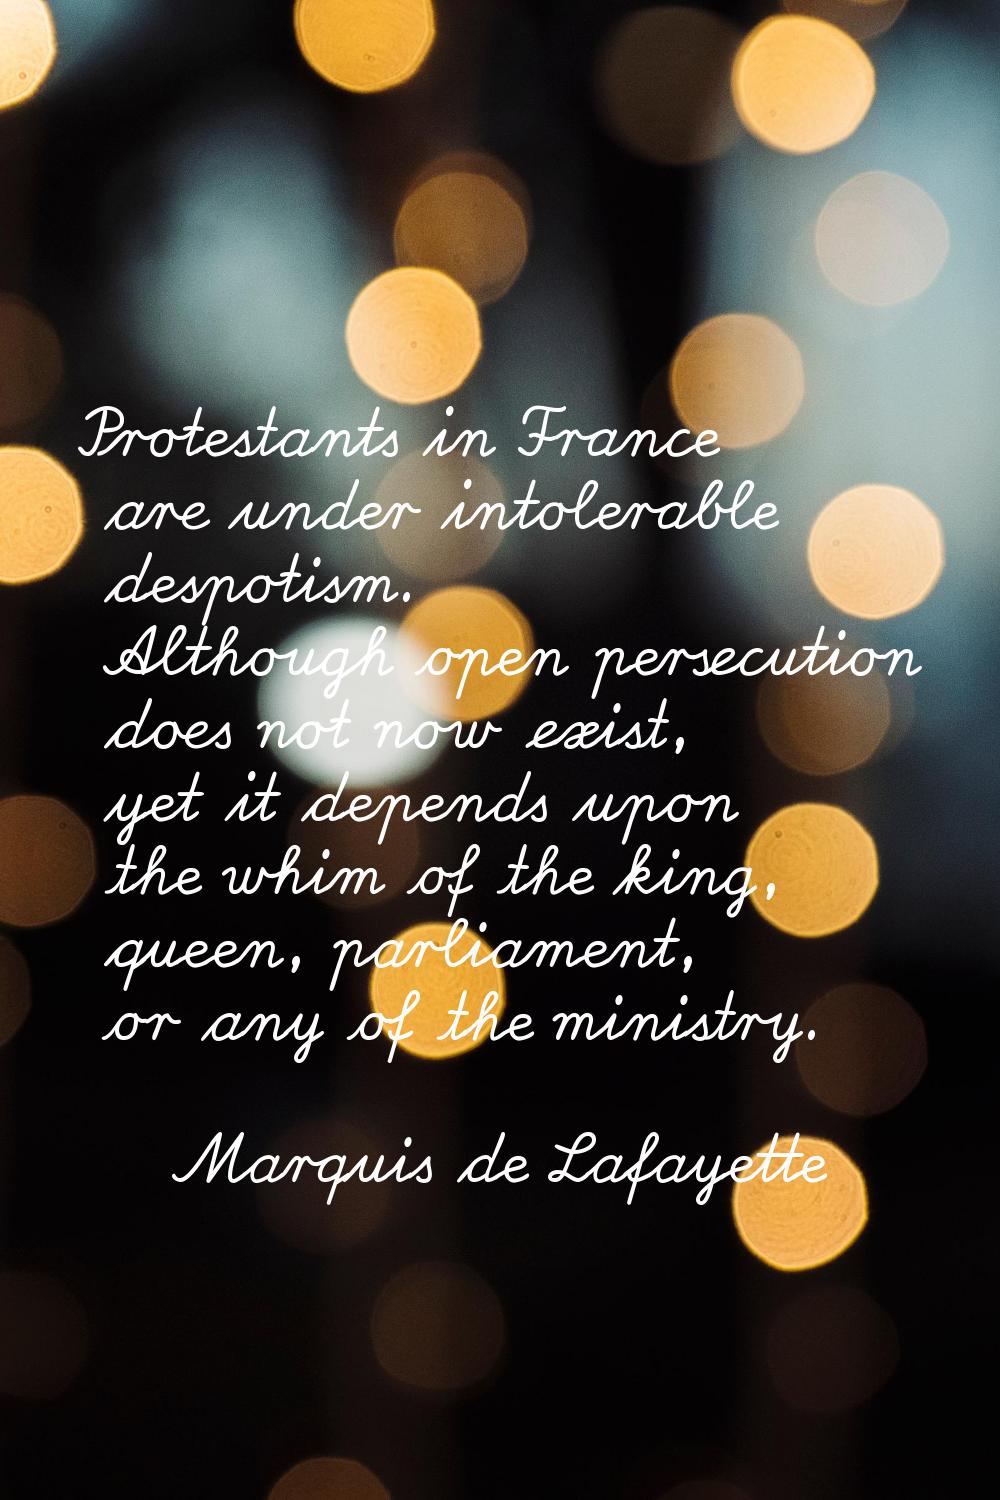 Protestants in France are under intolerable despotism. Although open persecution does not now exist